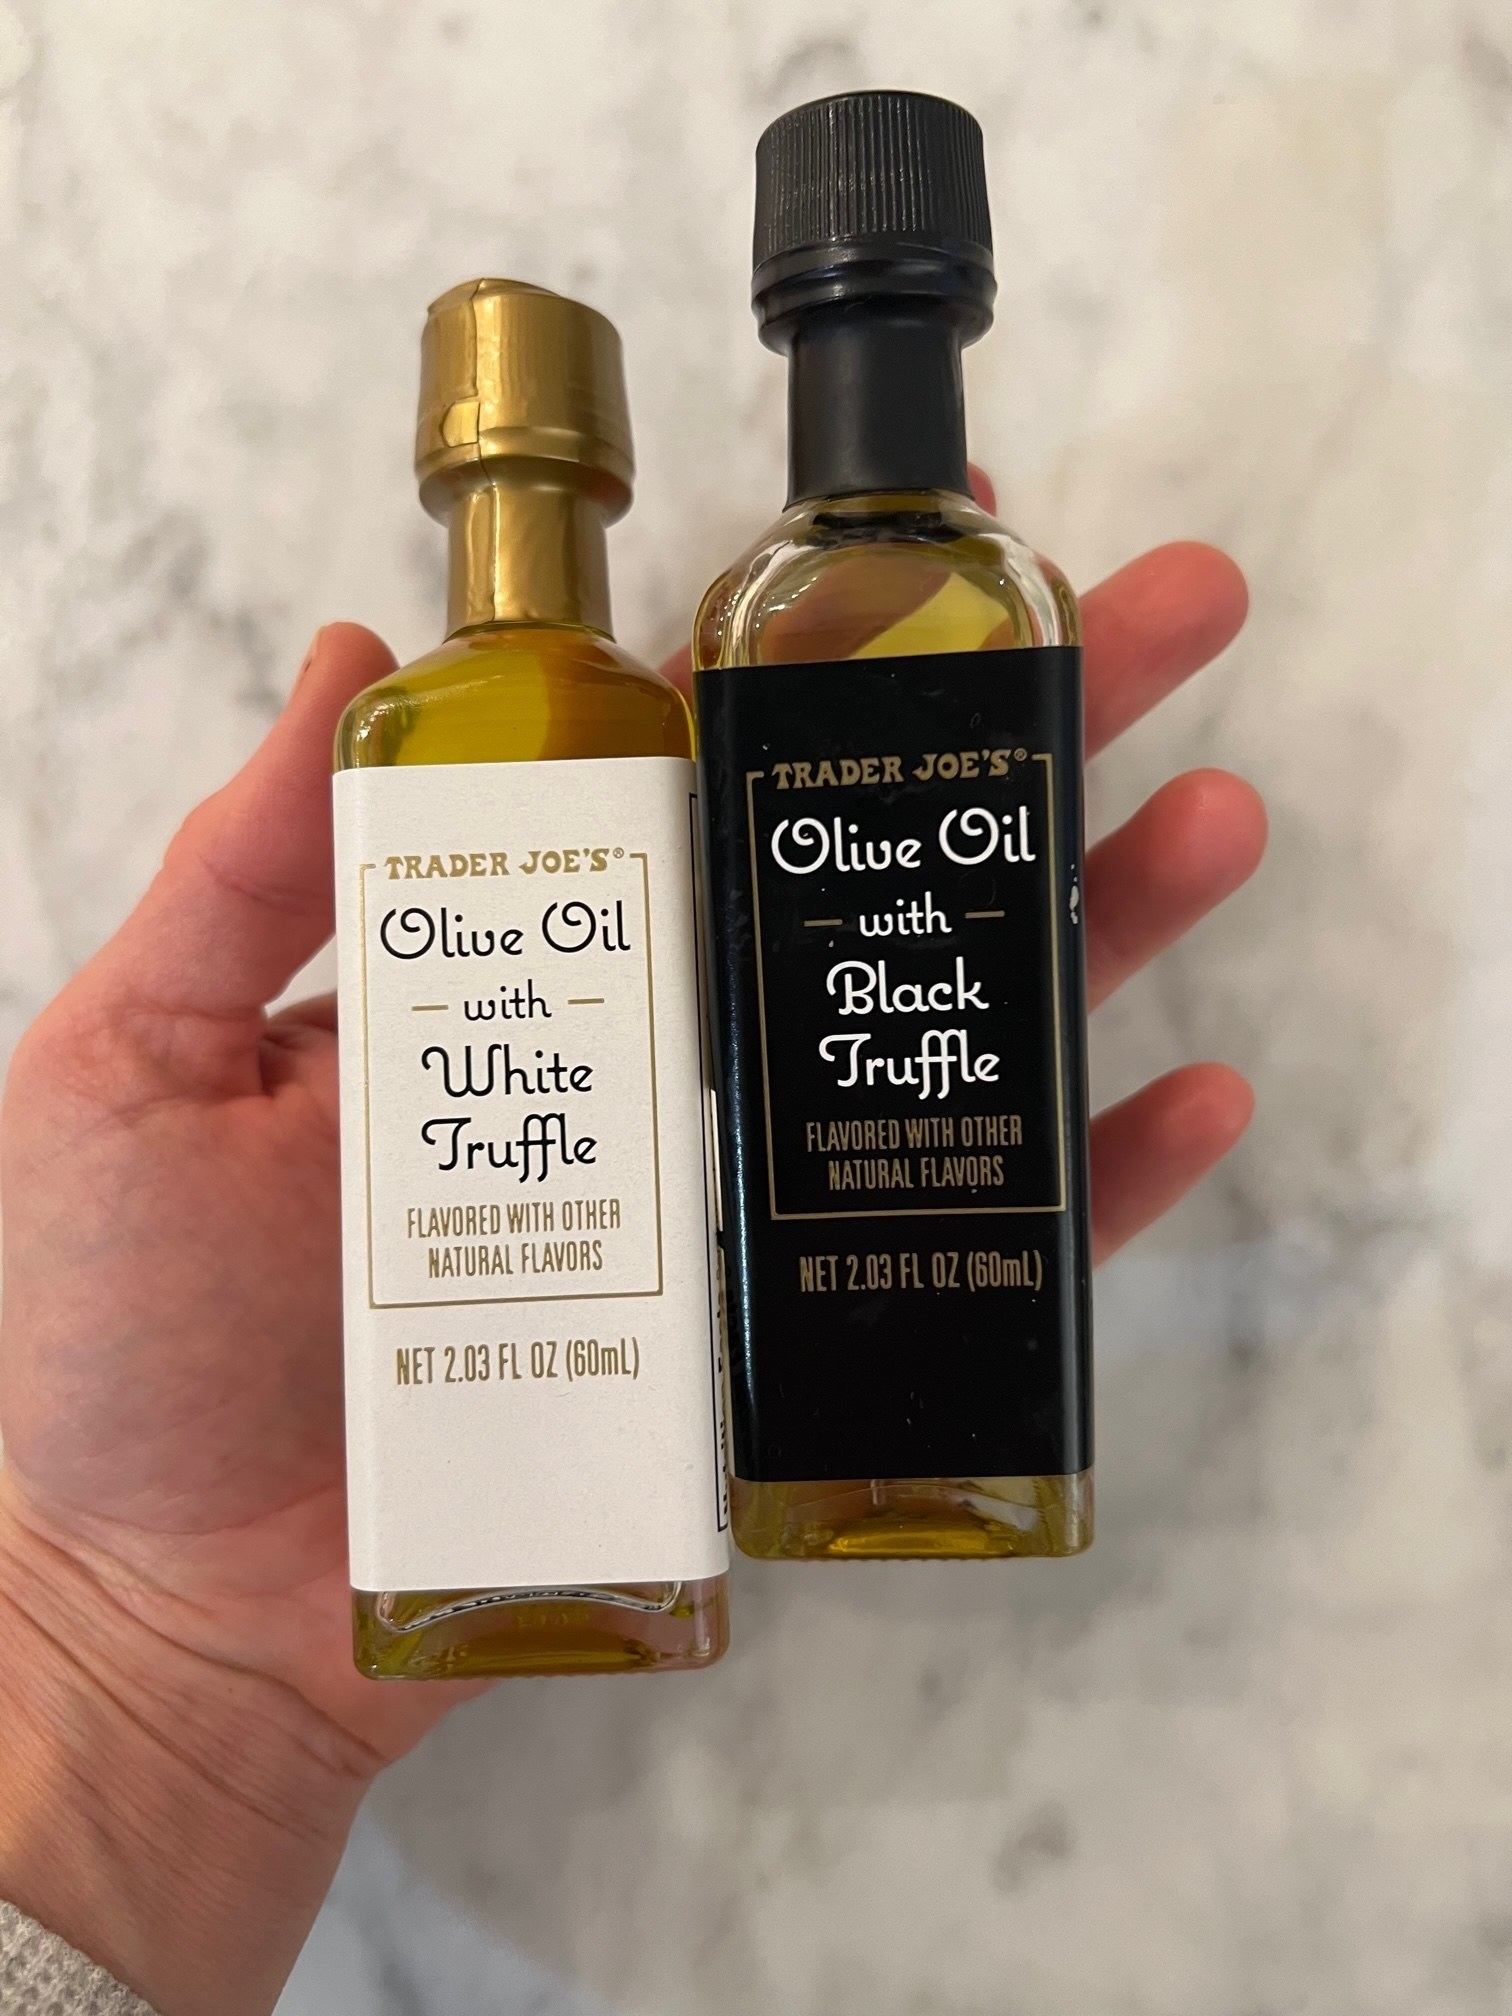 A hand holding two bottles of truffle olive oil